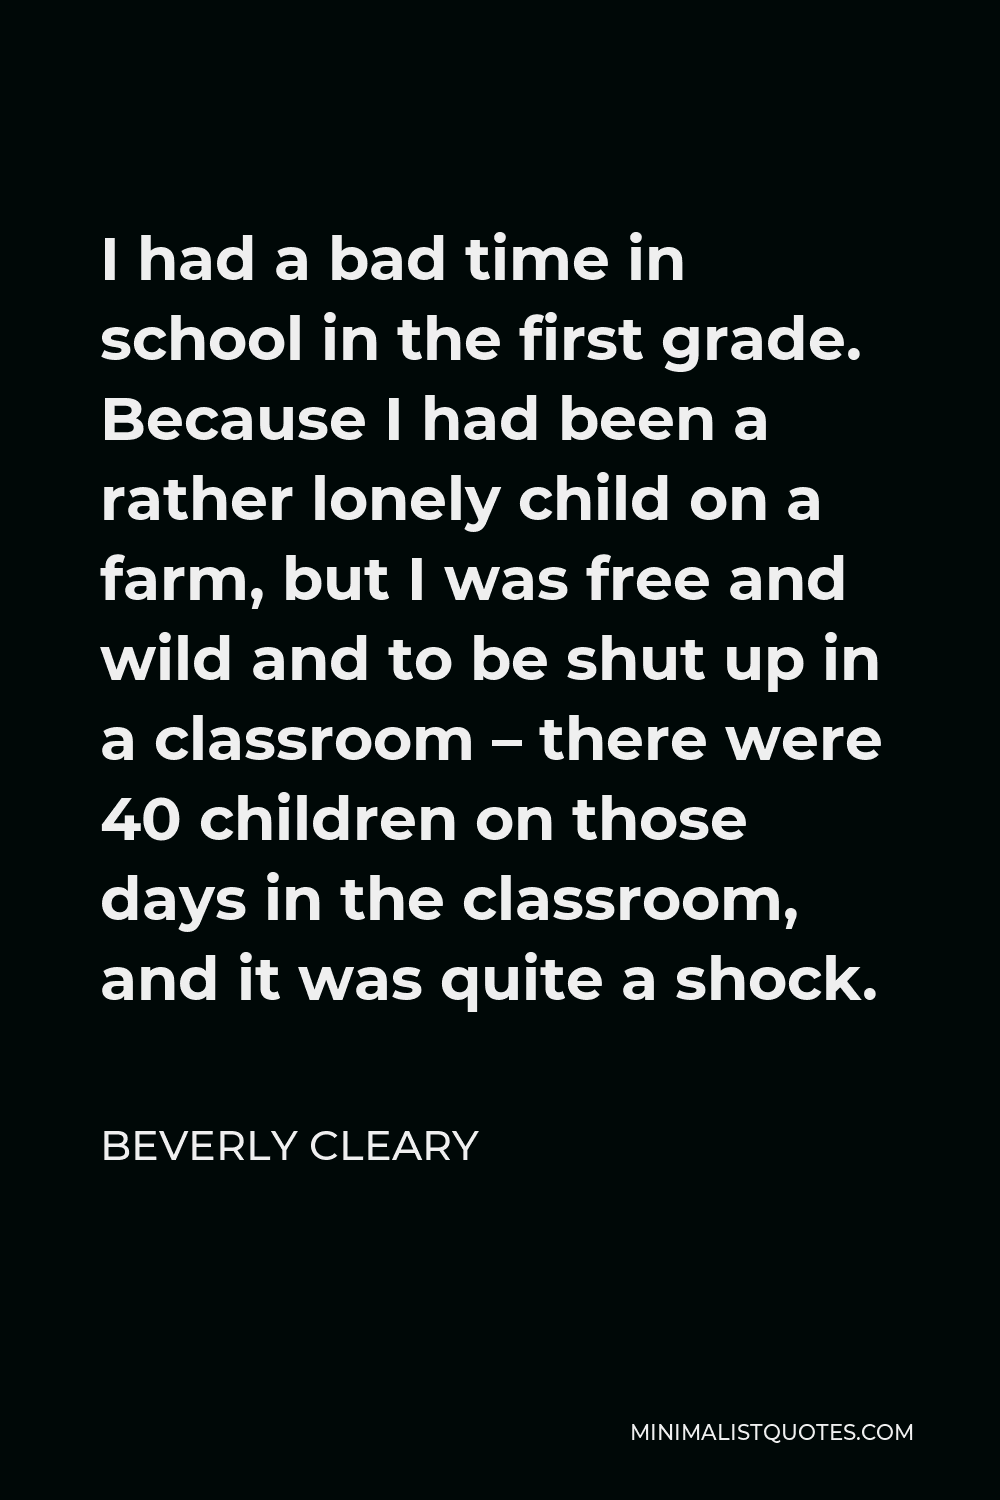 Beverly Cleary Quote - I had a bad time in school in the first grade. Because I had been a rather lonely child on a farm, but I was free and wild and to be shut up in a classroom – there were 40 children on those days in the classroom, and it was quite a shock.